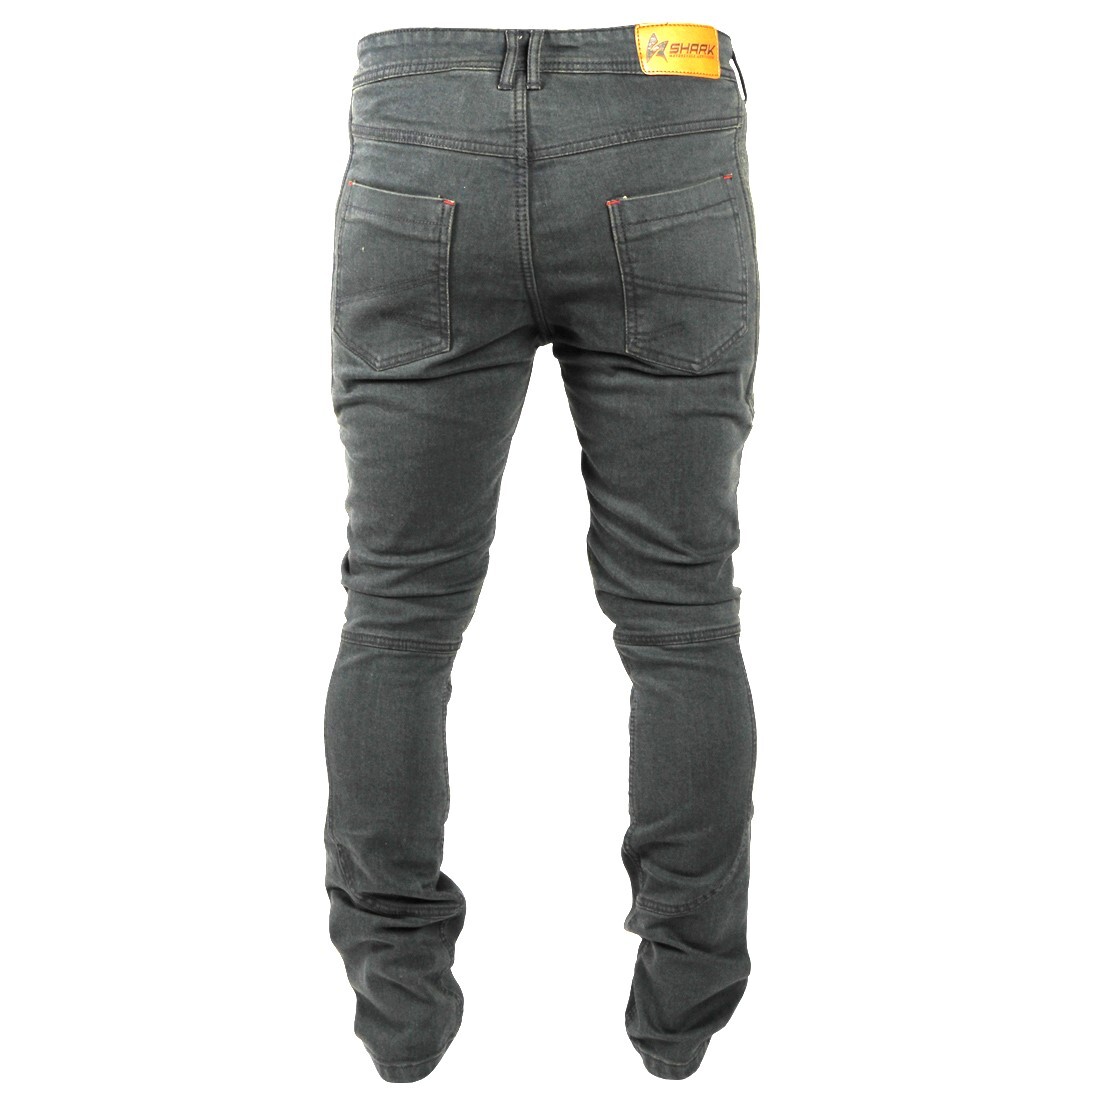 Shark Tracer Protective Jeans [Black - 30]